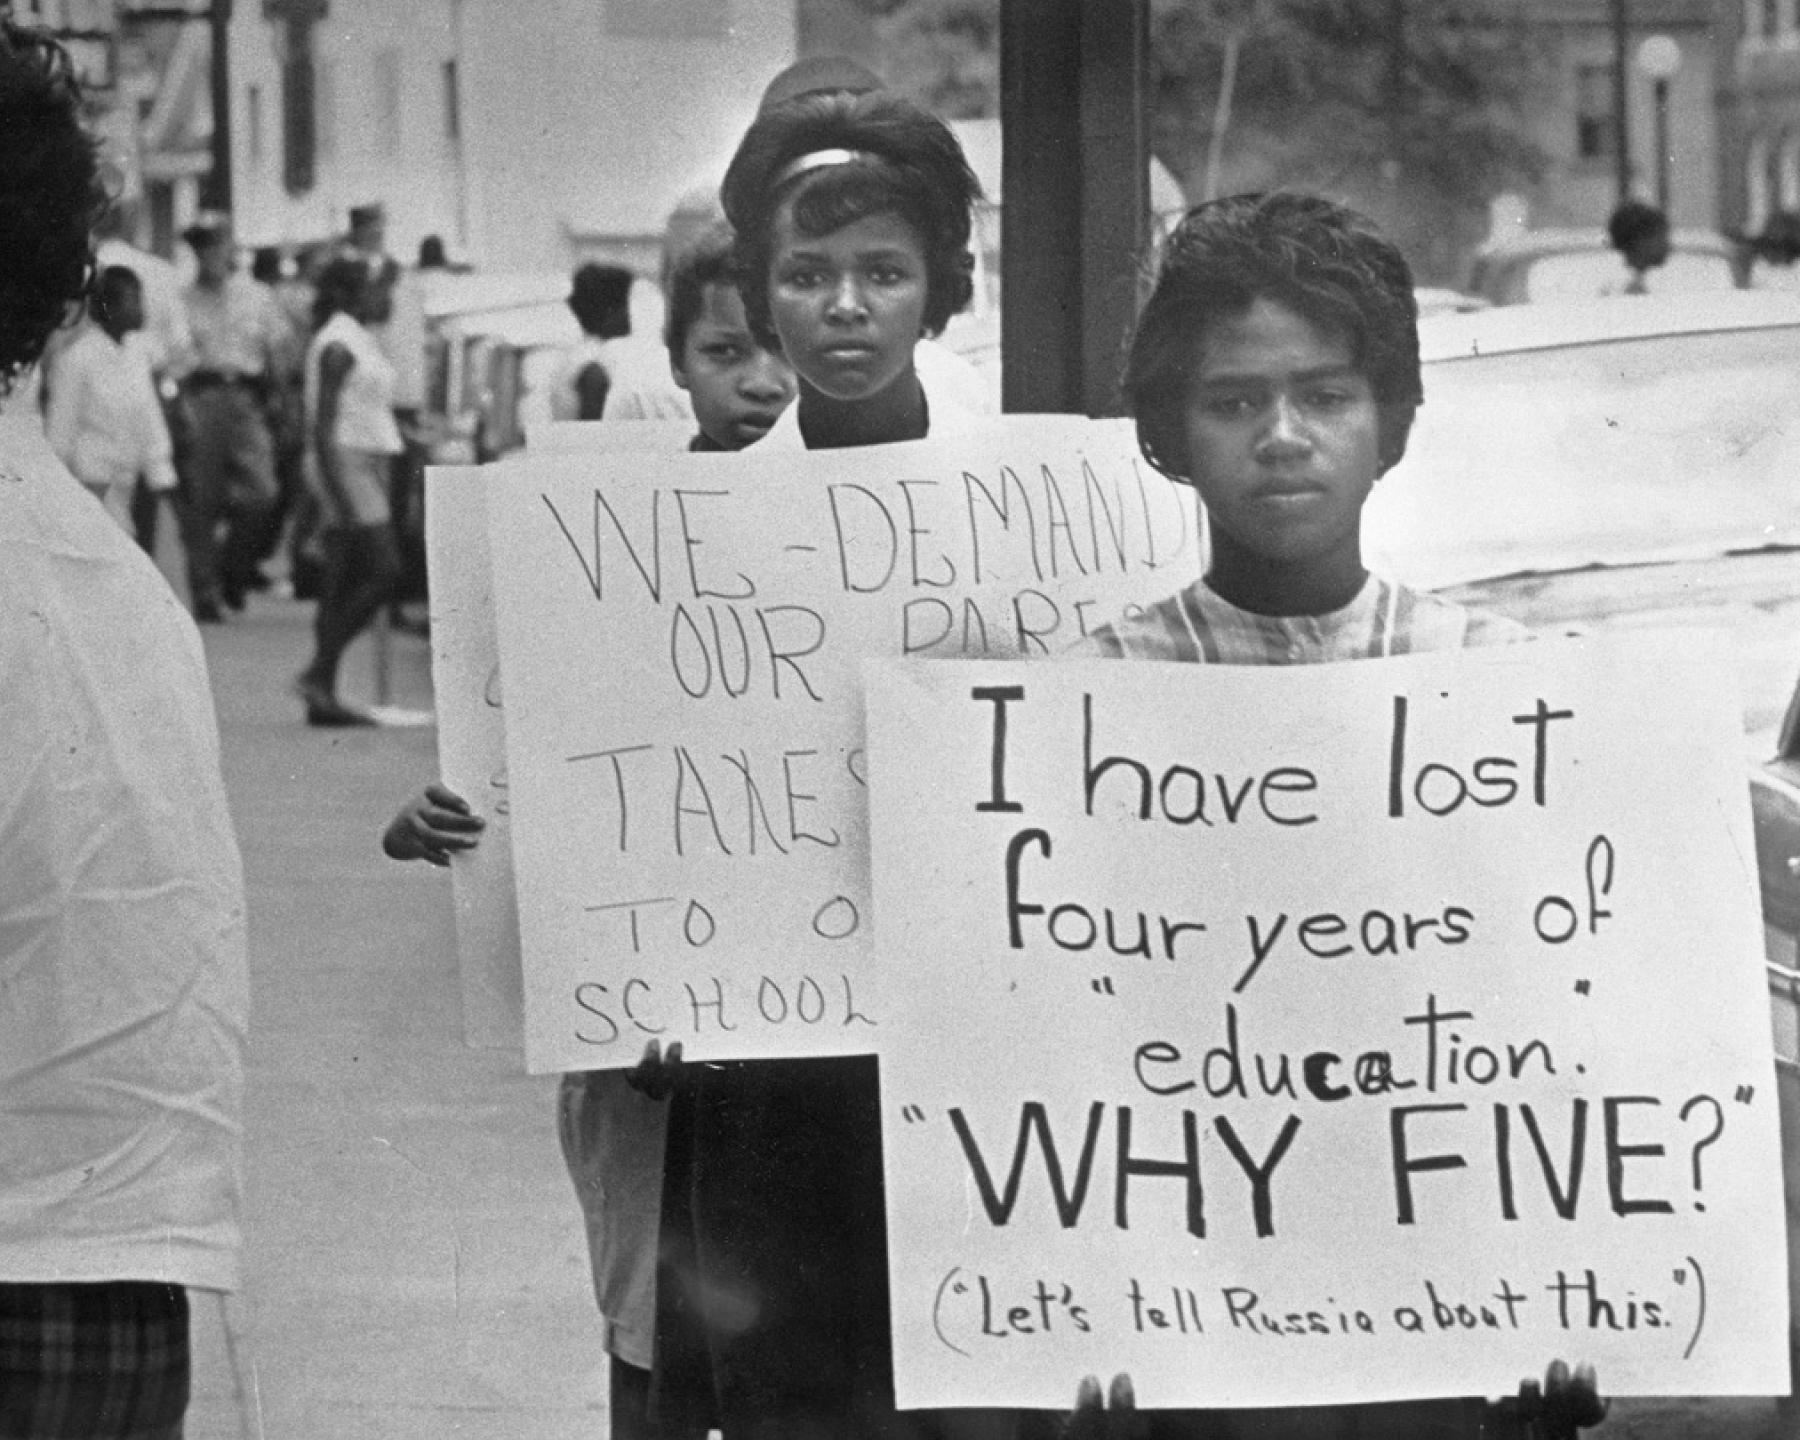 Determined: The 400-Year Struggle for Black Equality￼